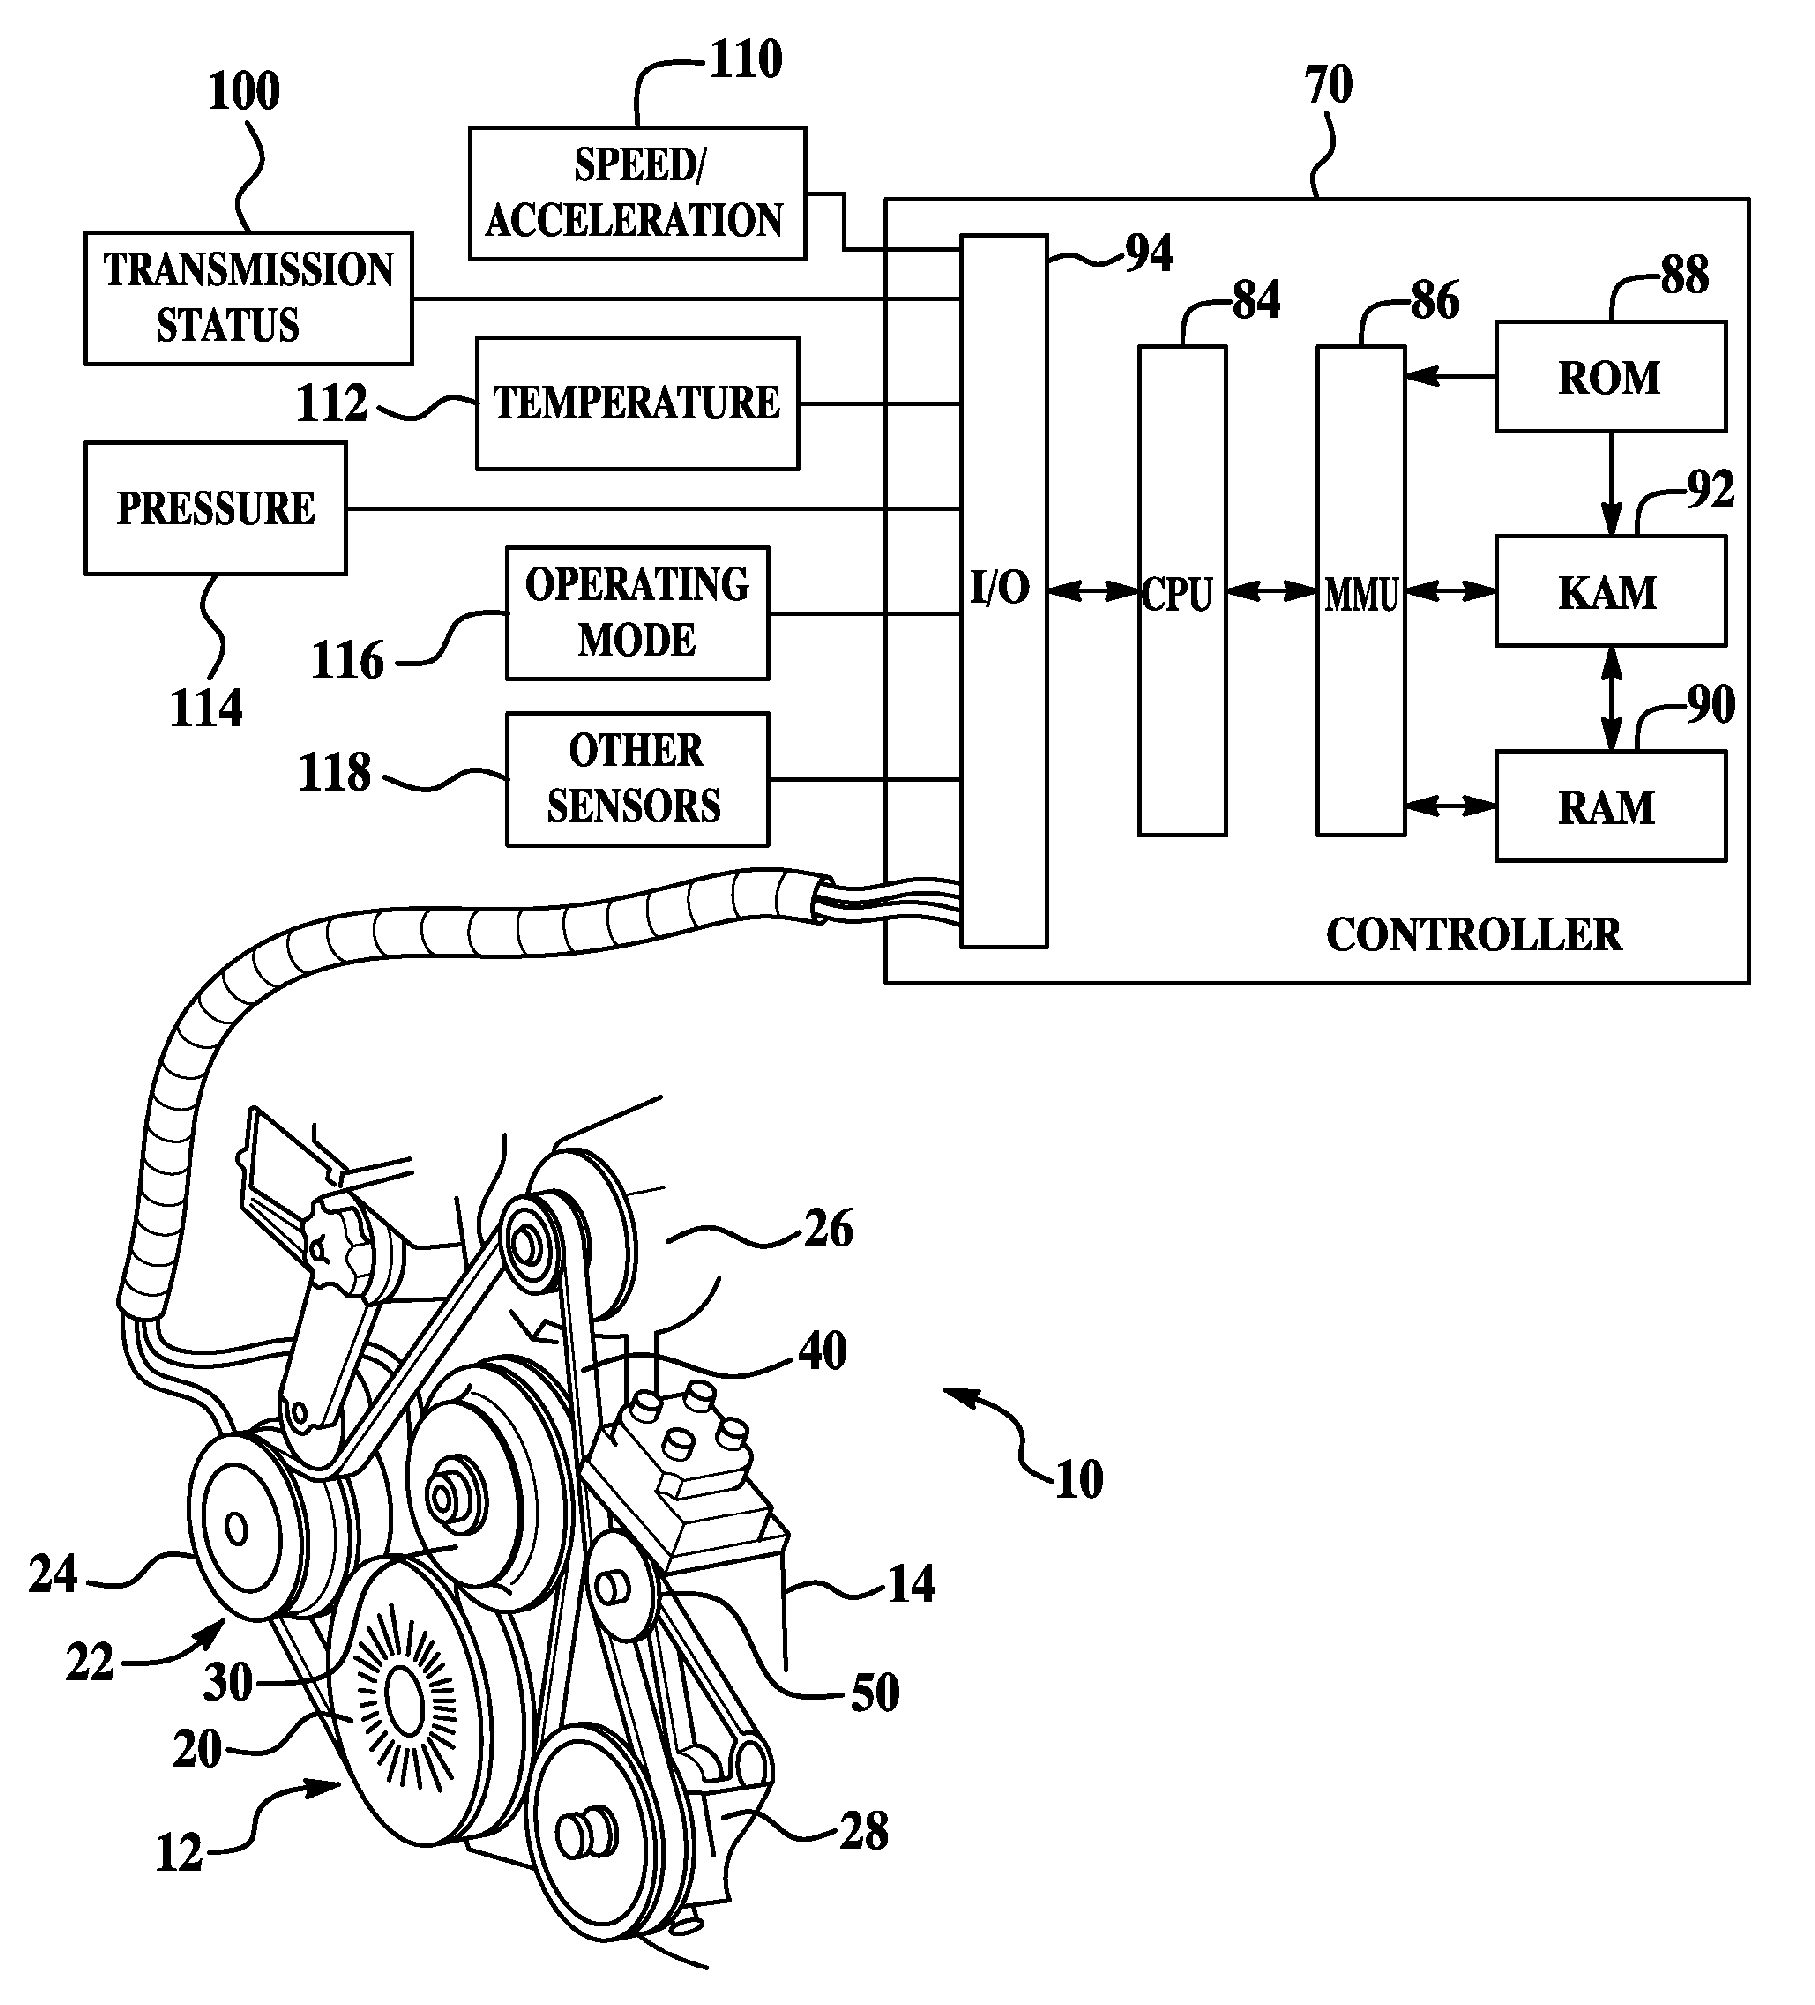 Electromagnetic coupling device for engine accessories